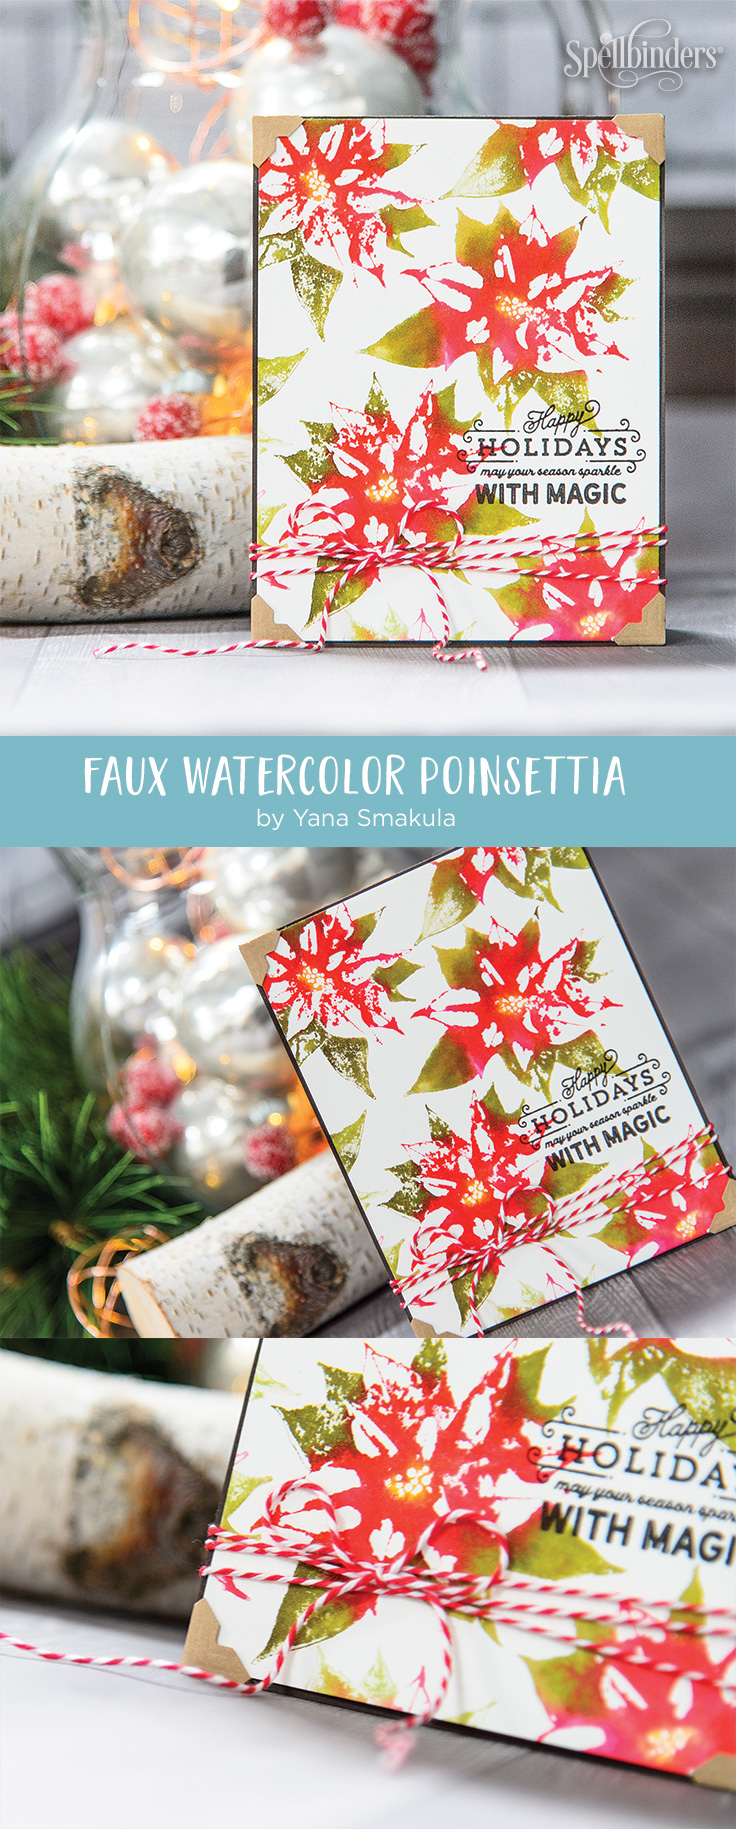 Faux Watercolor Stamping with Poinsettia Holiday 3D Shading Stamp. Video tutorial. Happy Holidays Card by Yana Smakula for Spellbinders #spellbinders #stamping #christmascard #fauxwatercolor